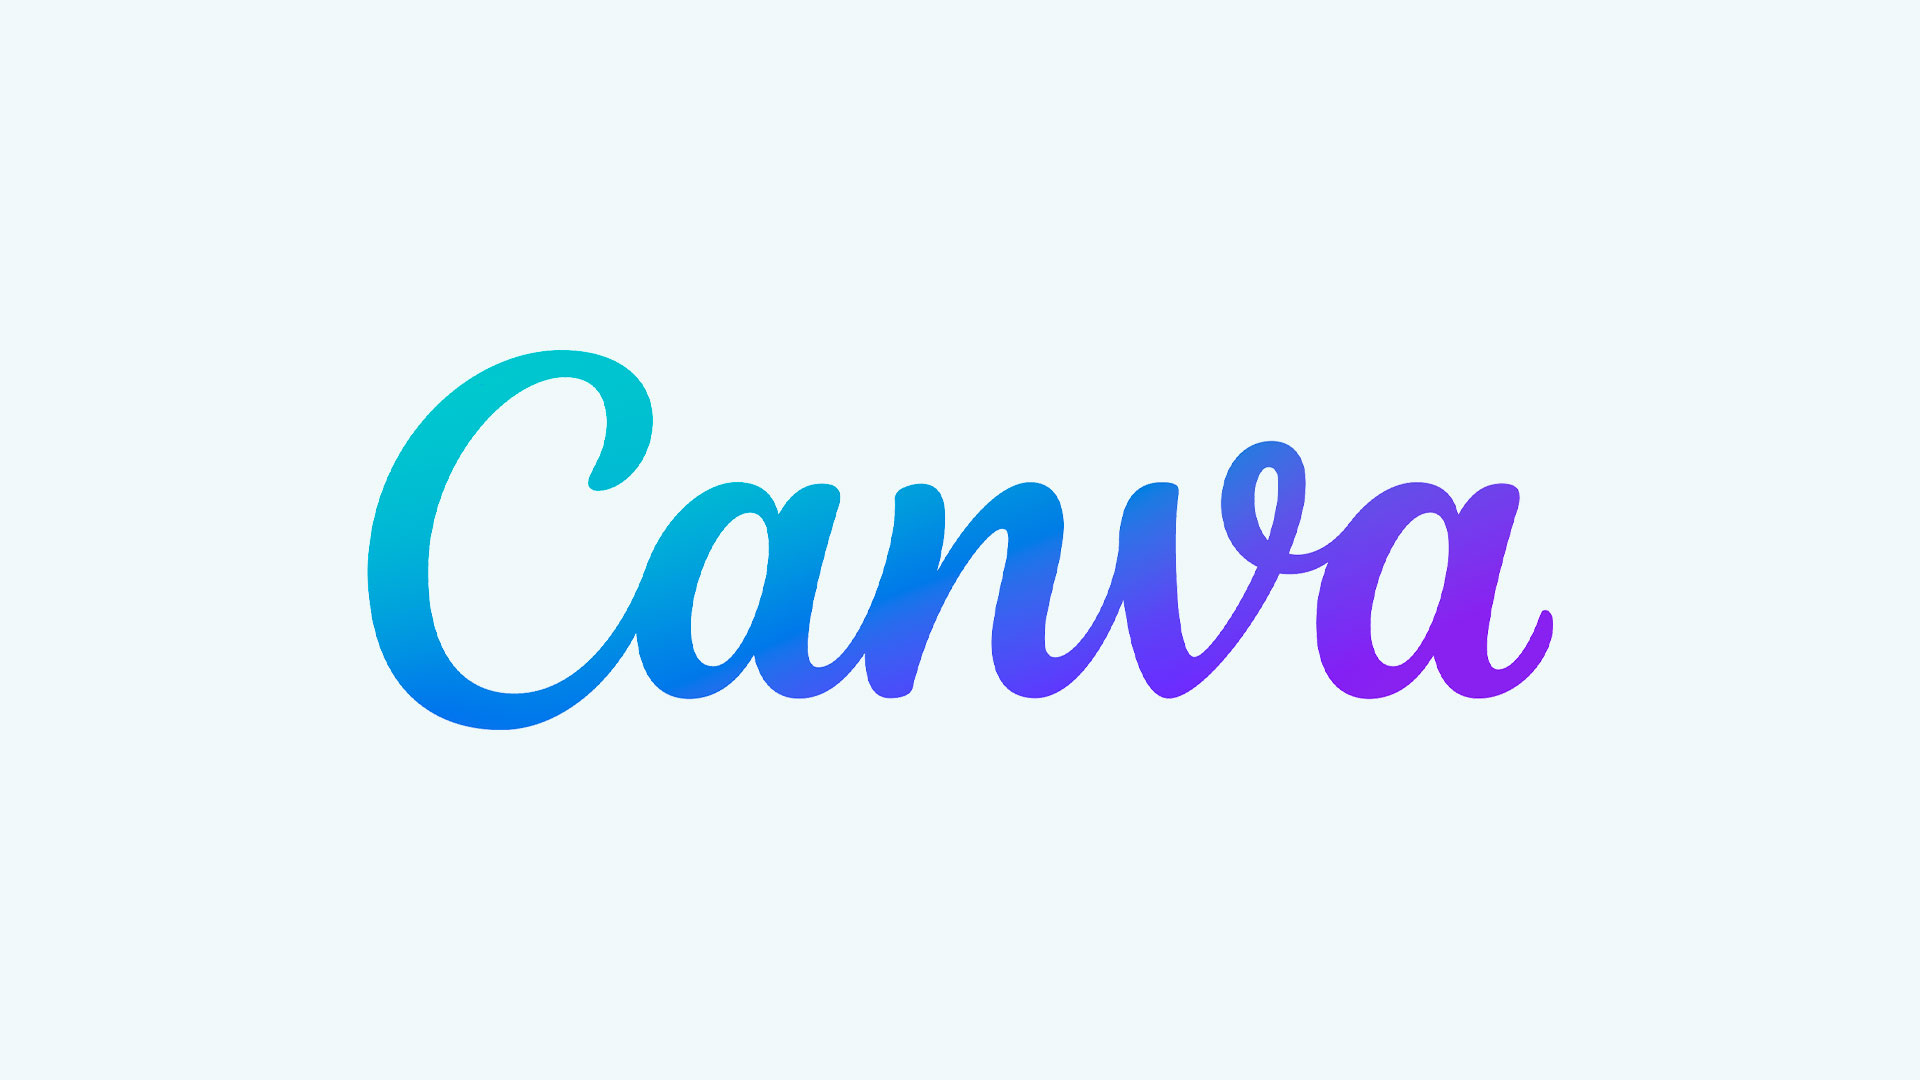 One-Page Website Builder - Create a Free Canva Website